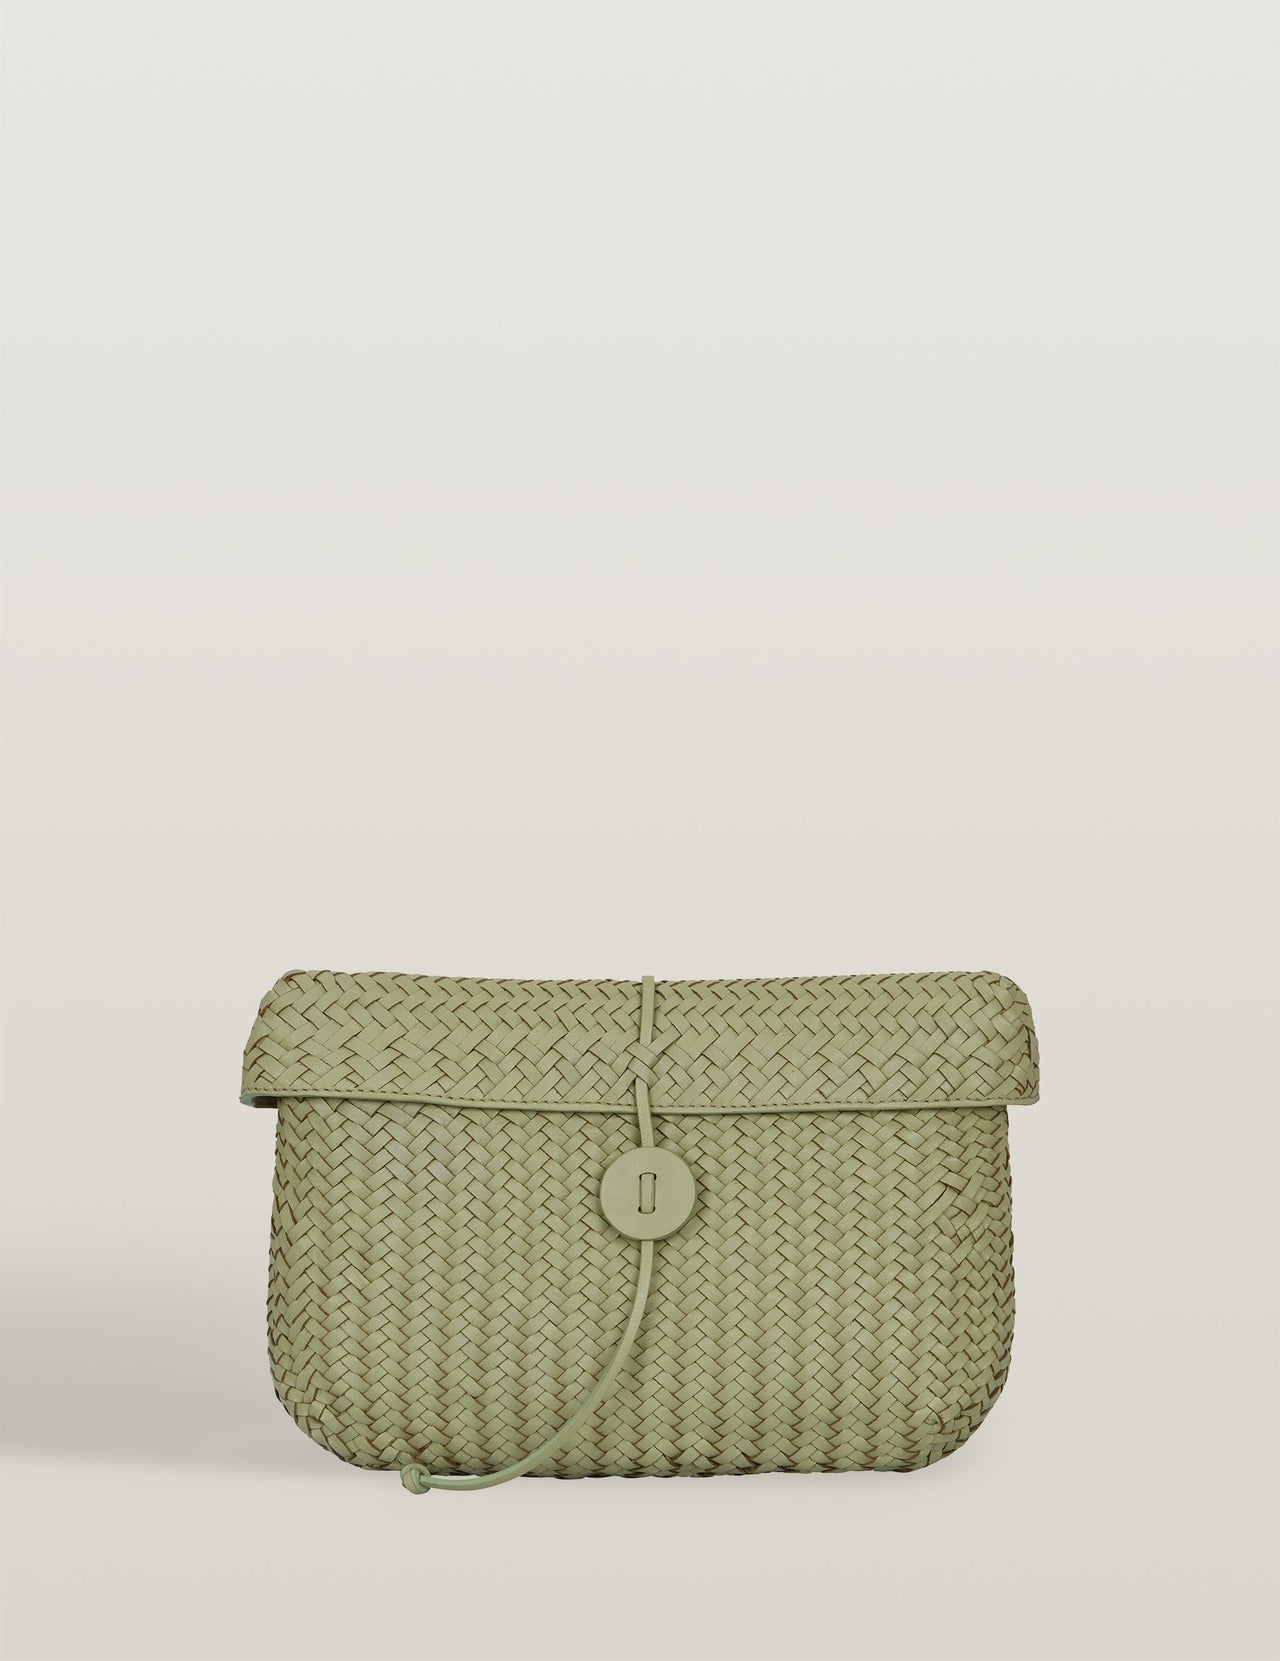 Sage Handwoven Leather Clutch